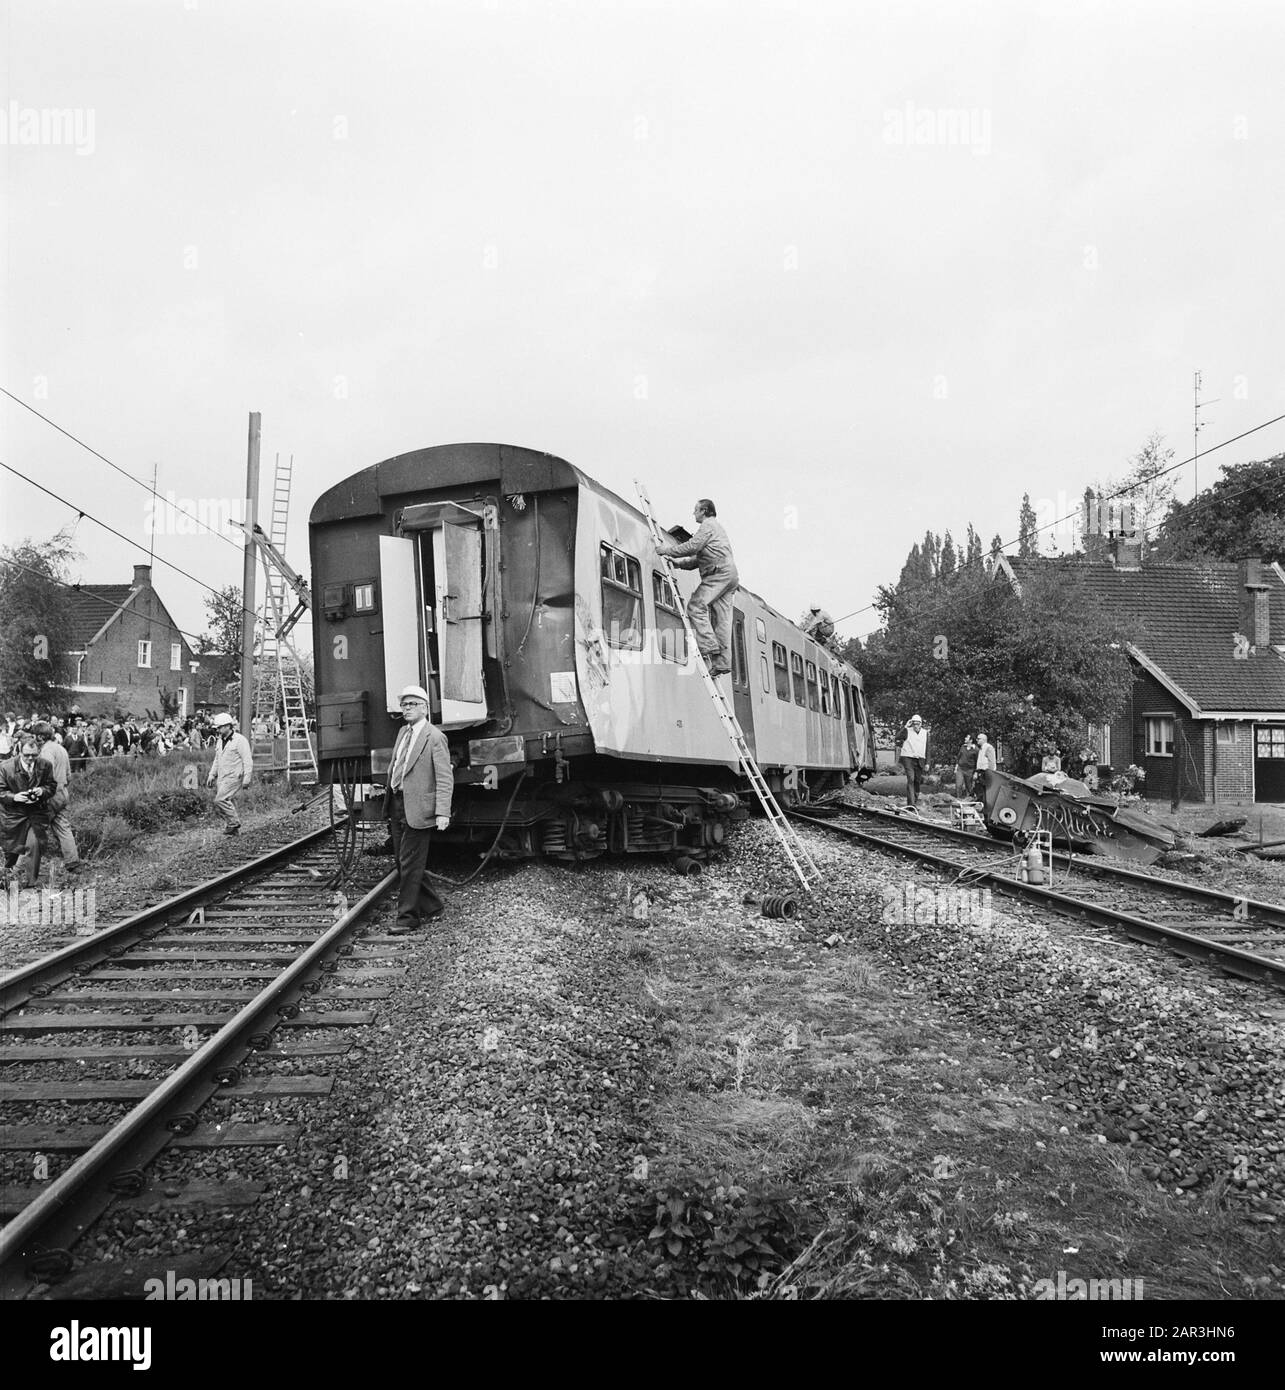 Train derailed in Heeze near Eindhoven Date: May 14, 1978 Location: Eindhoven Keywords: trains Stock Photo